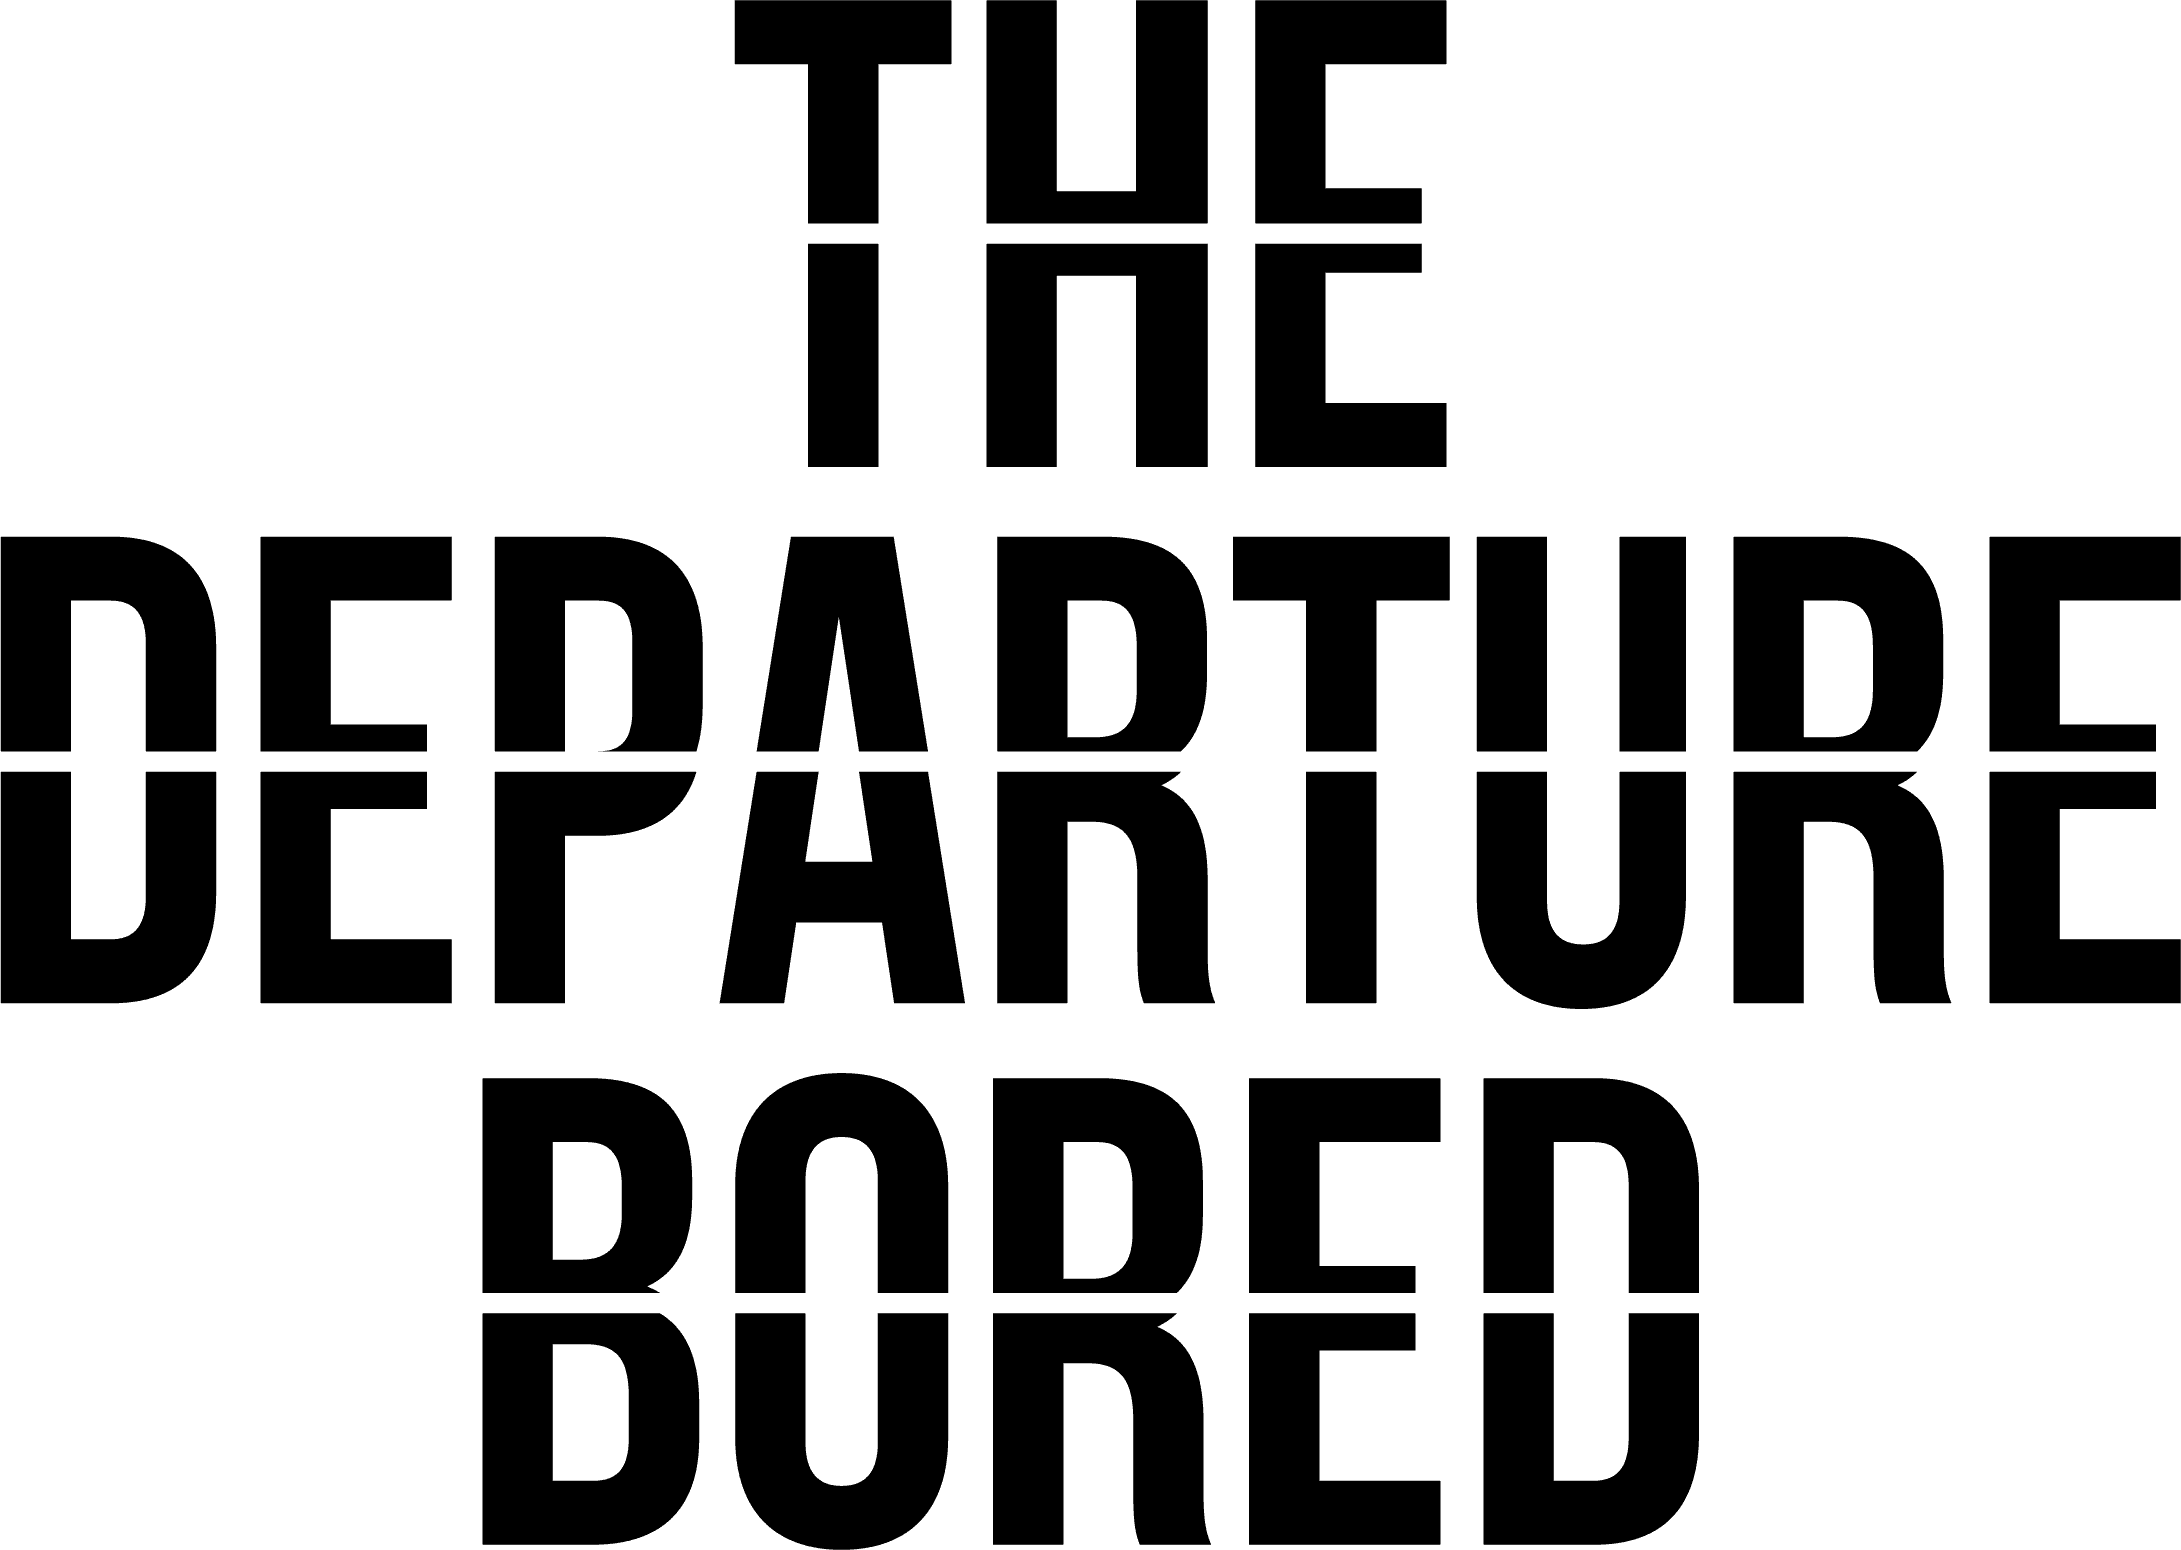 The Departure Bored logo